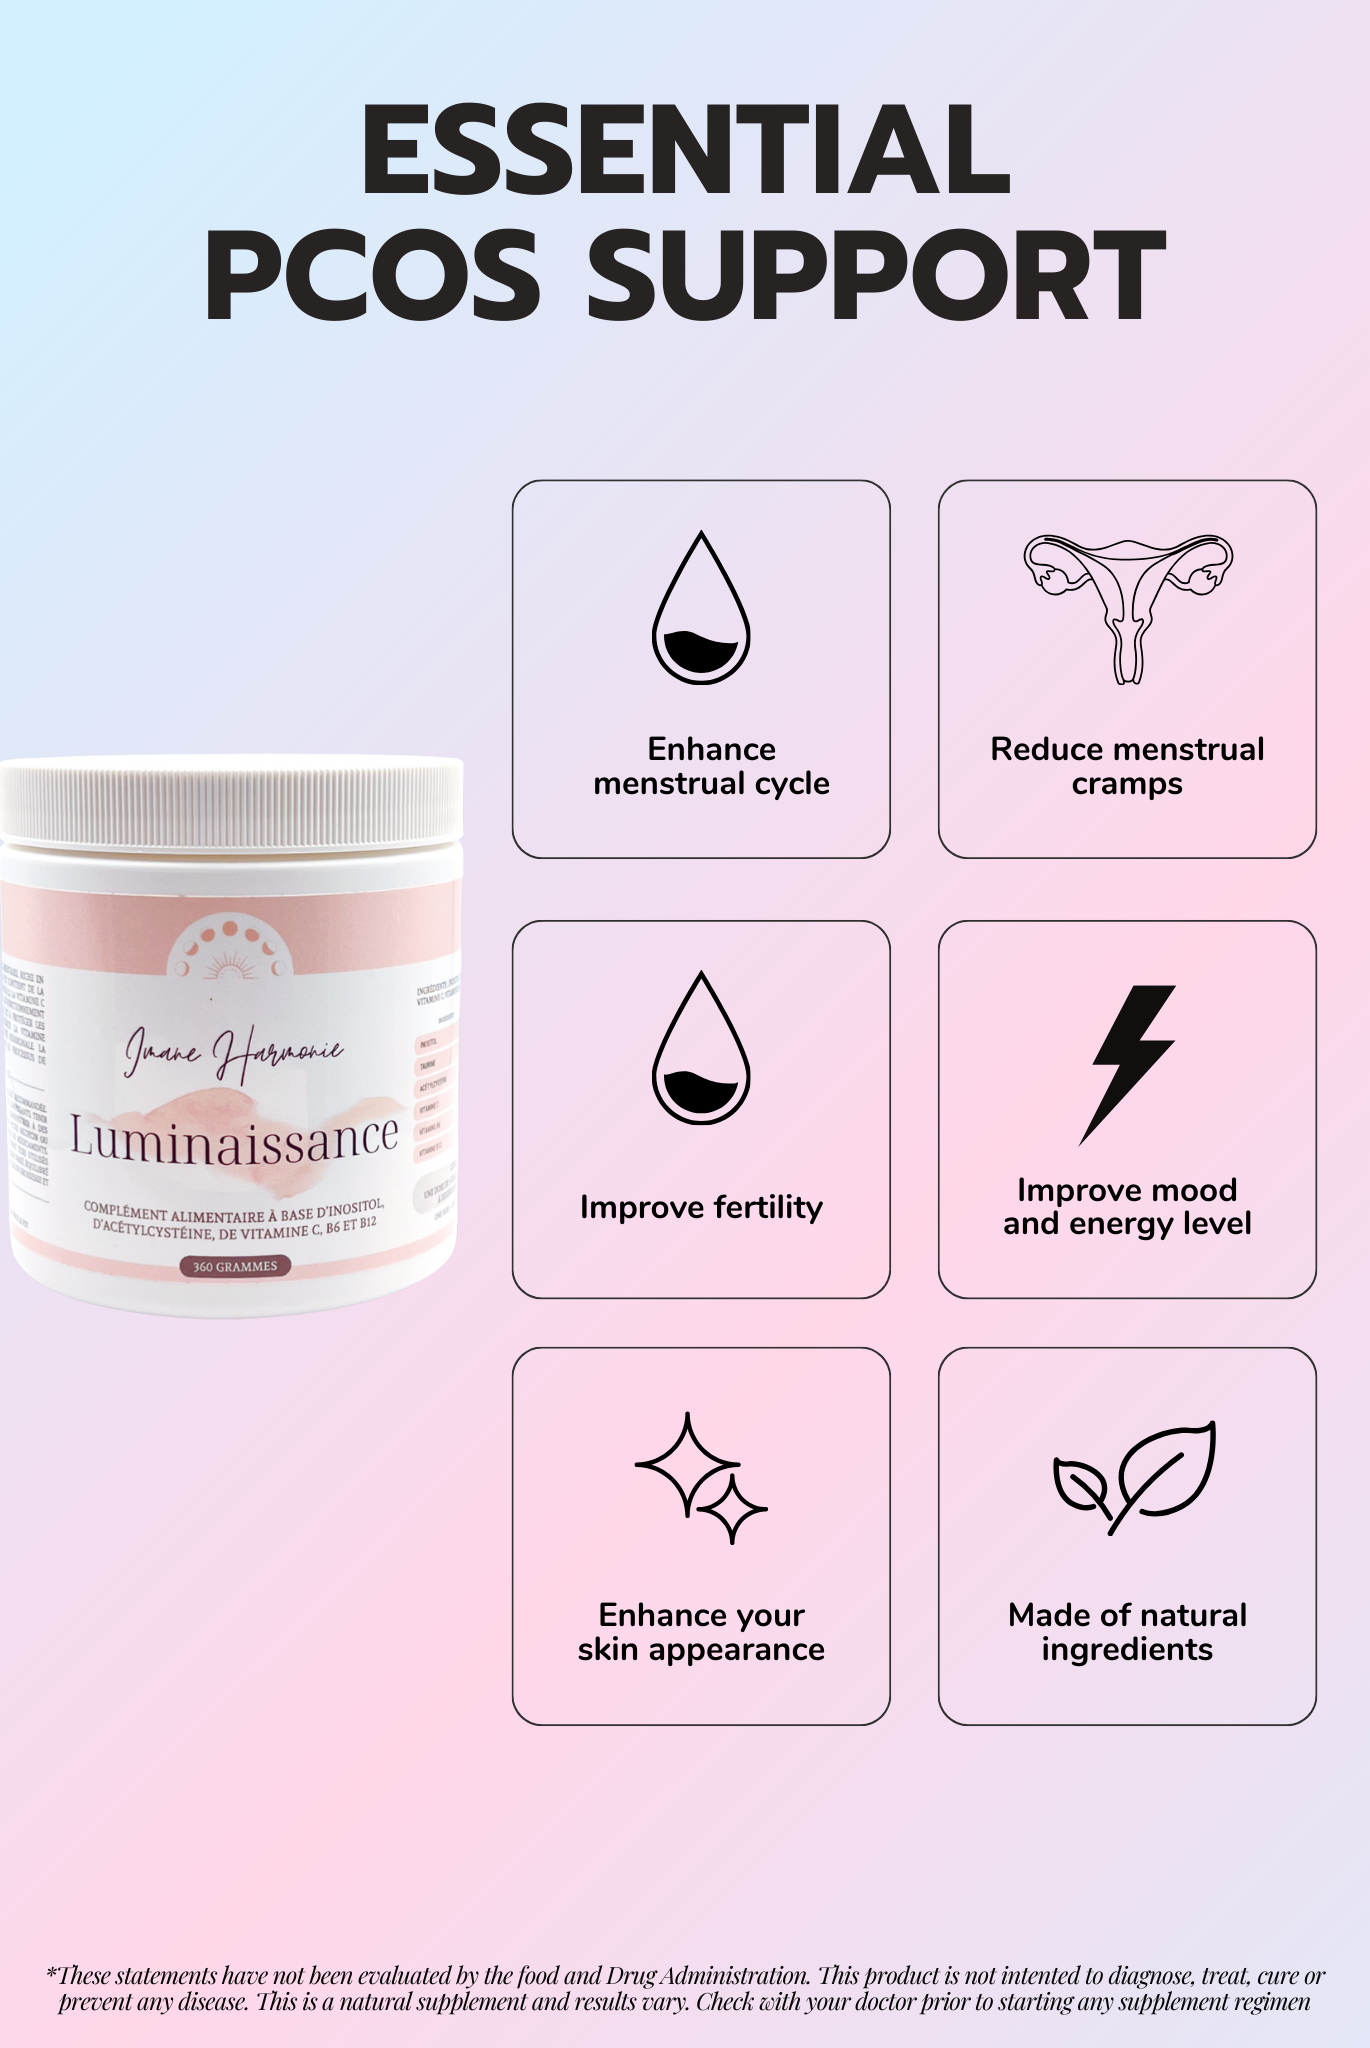 Features of luminaissance supplement : enhance menstrual cycle, reduce menstrual cramps, imrove fertility, improve mood and energy level, enhance your skin appearance, made of natural ingredients